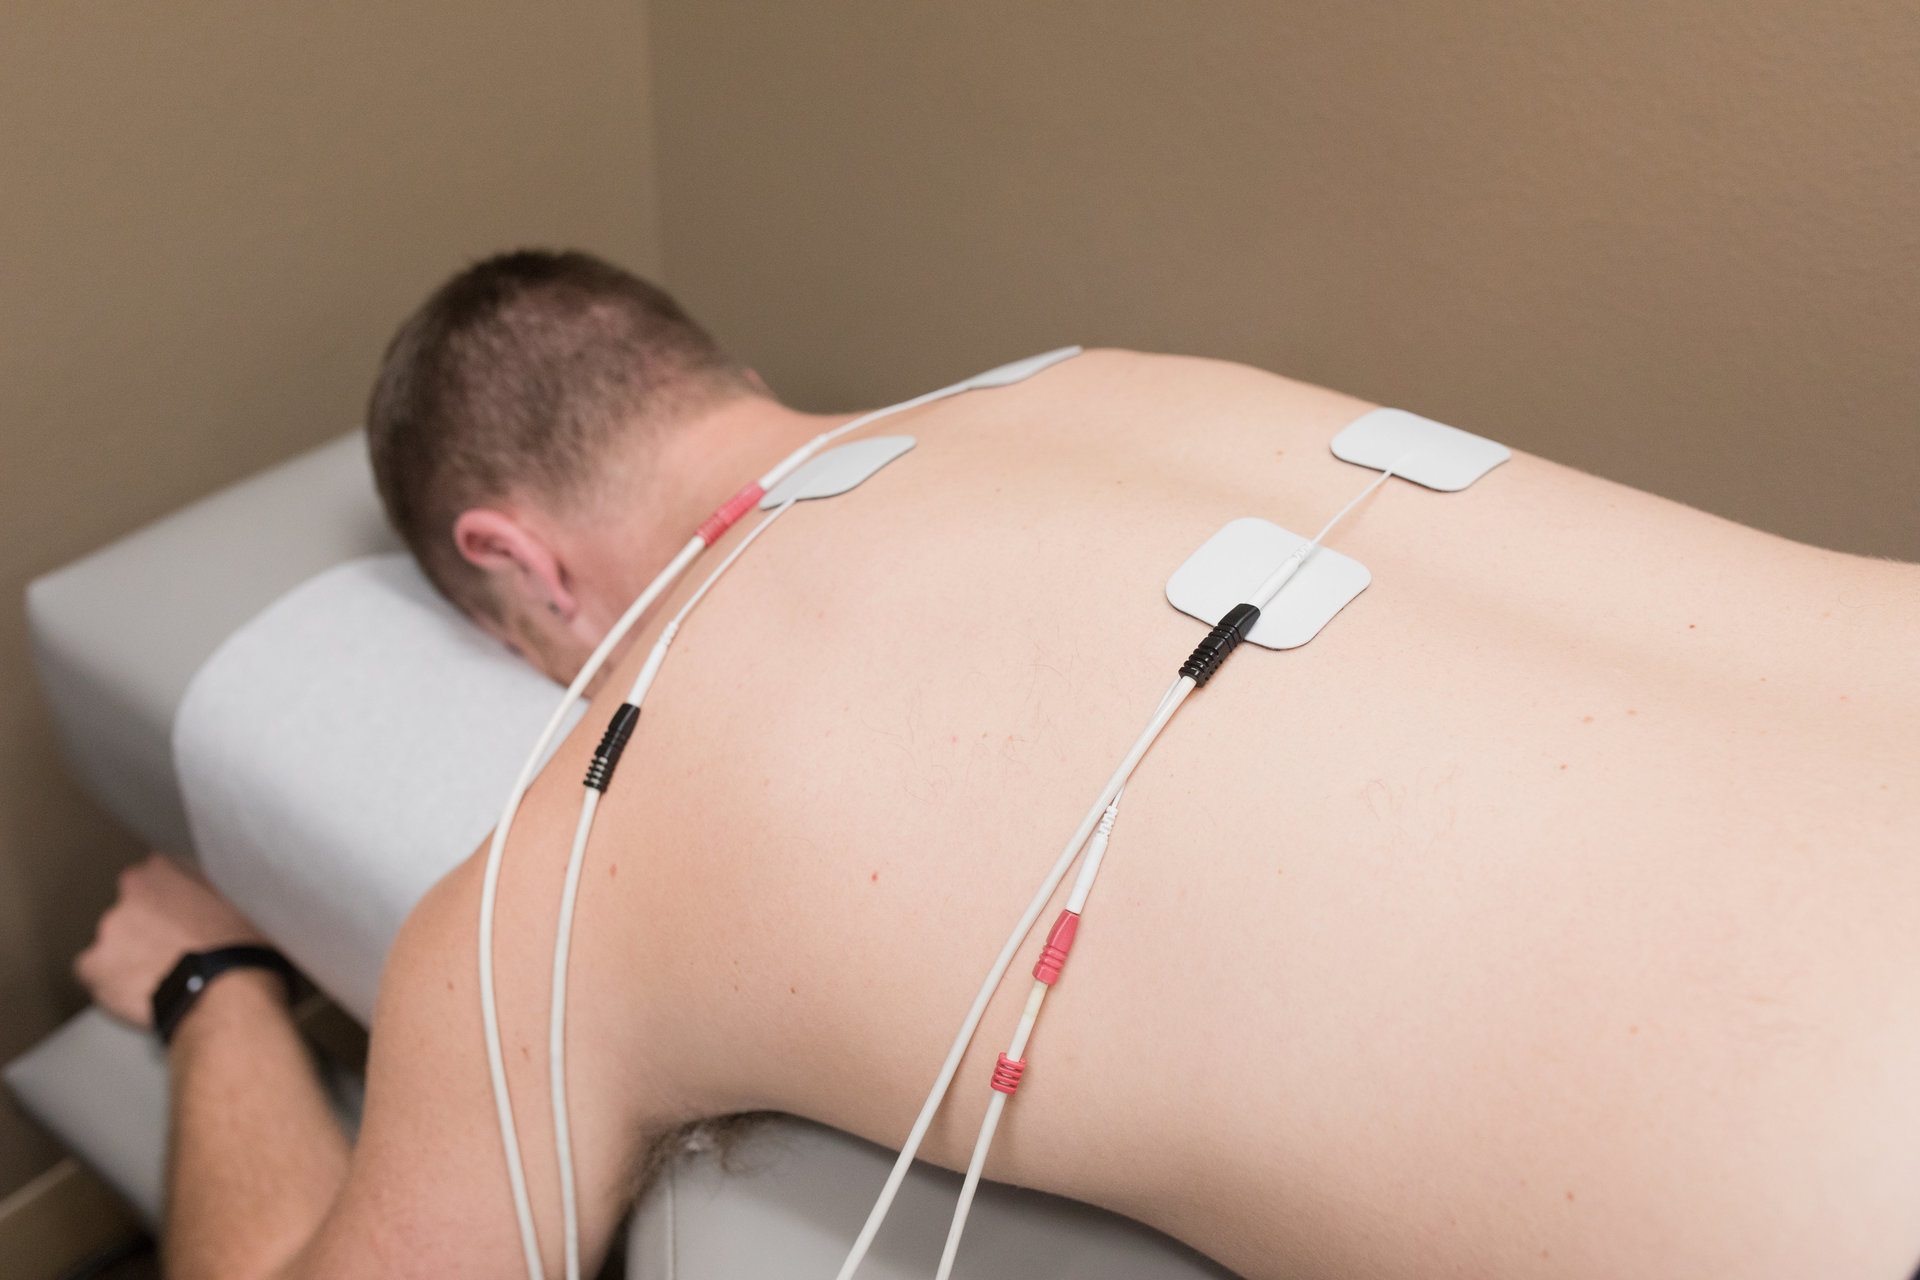 Electrical Muscle Stimulation — Village Chiropractic